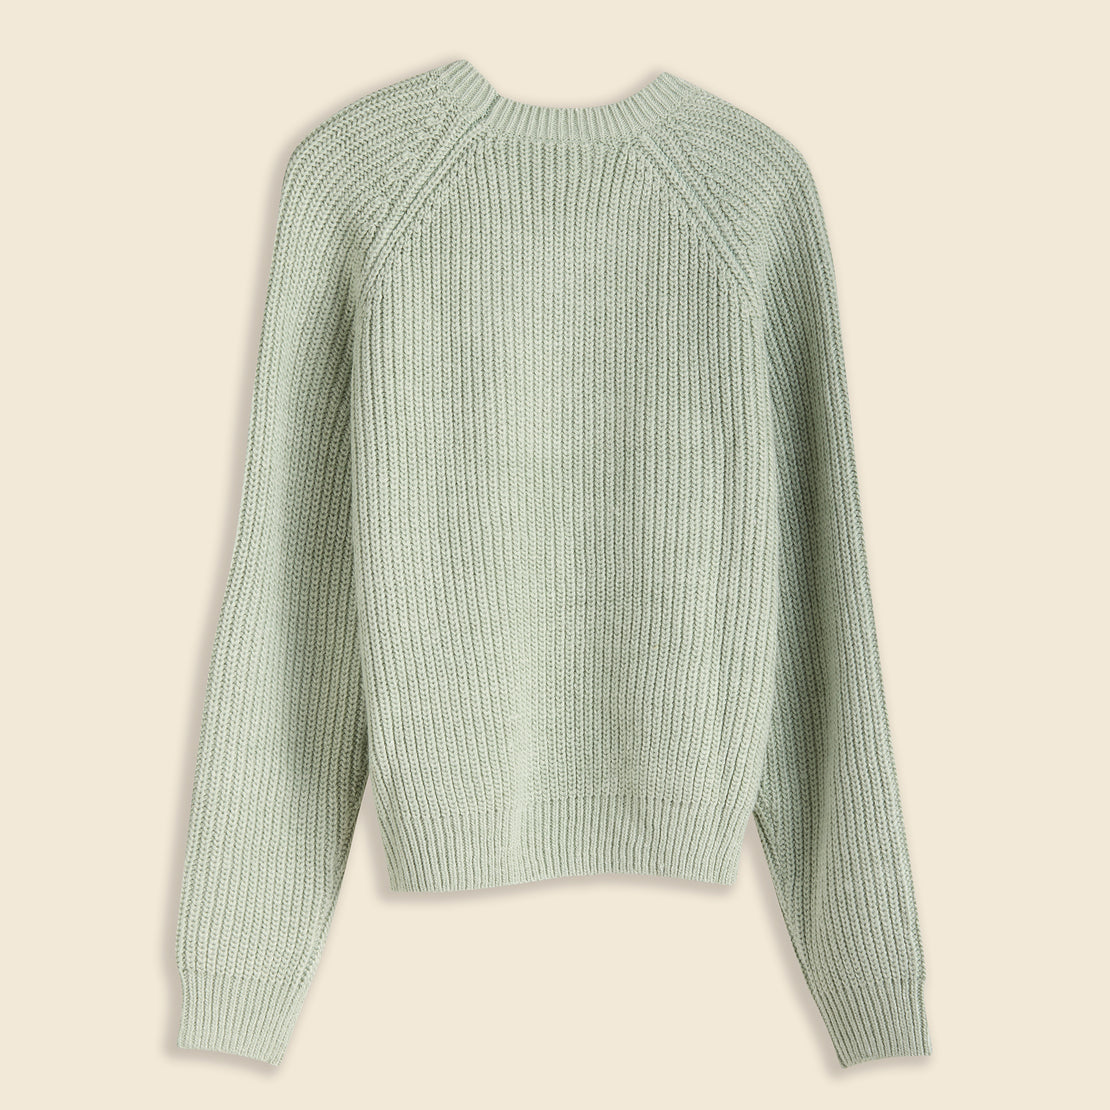 Emma Sweater - Misty Sage - Carhartt WIP - STAG Provisions - W - Tops - Sweater